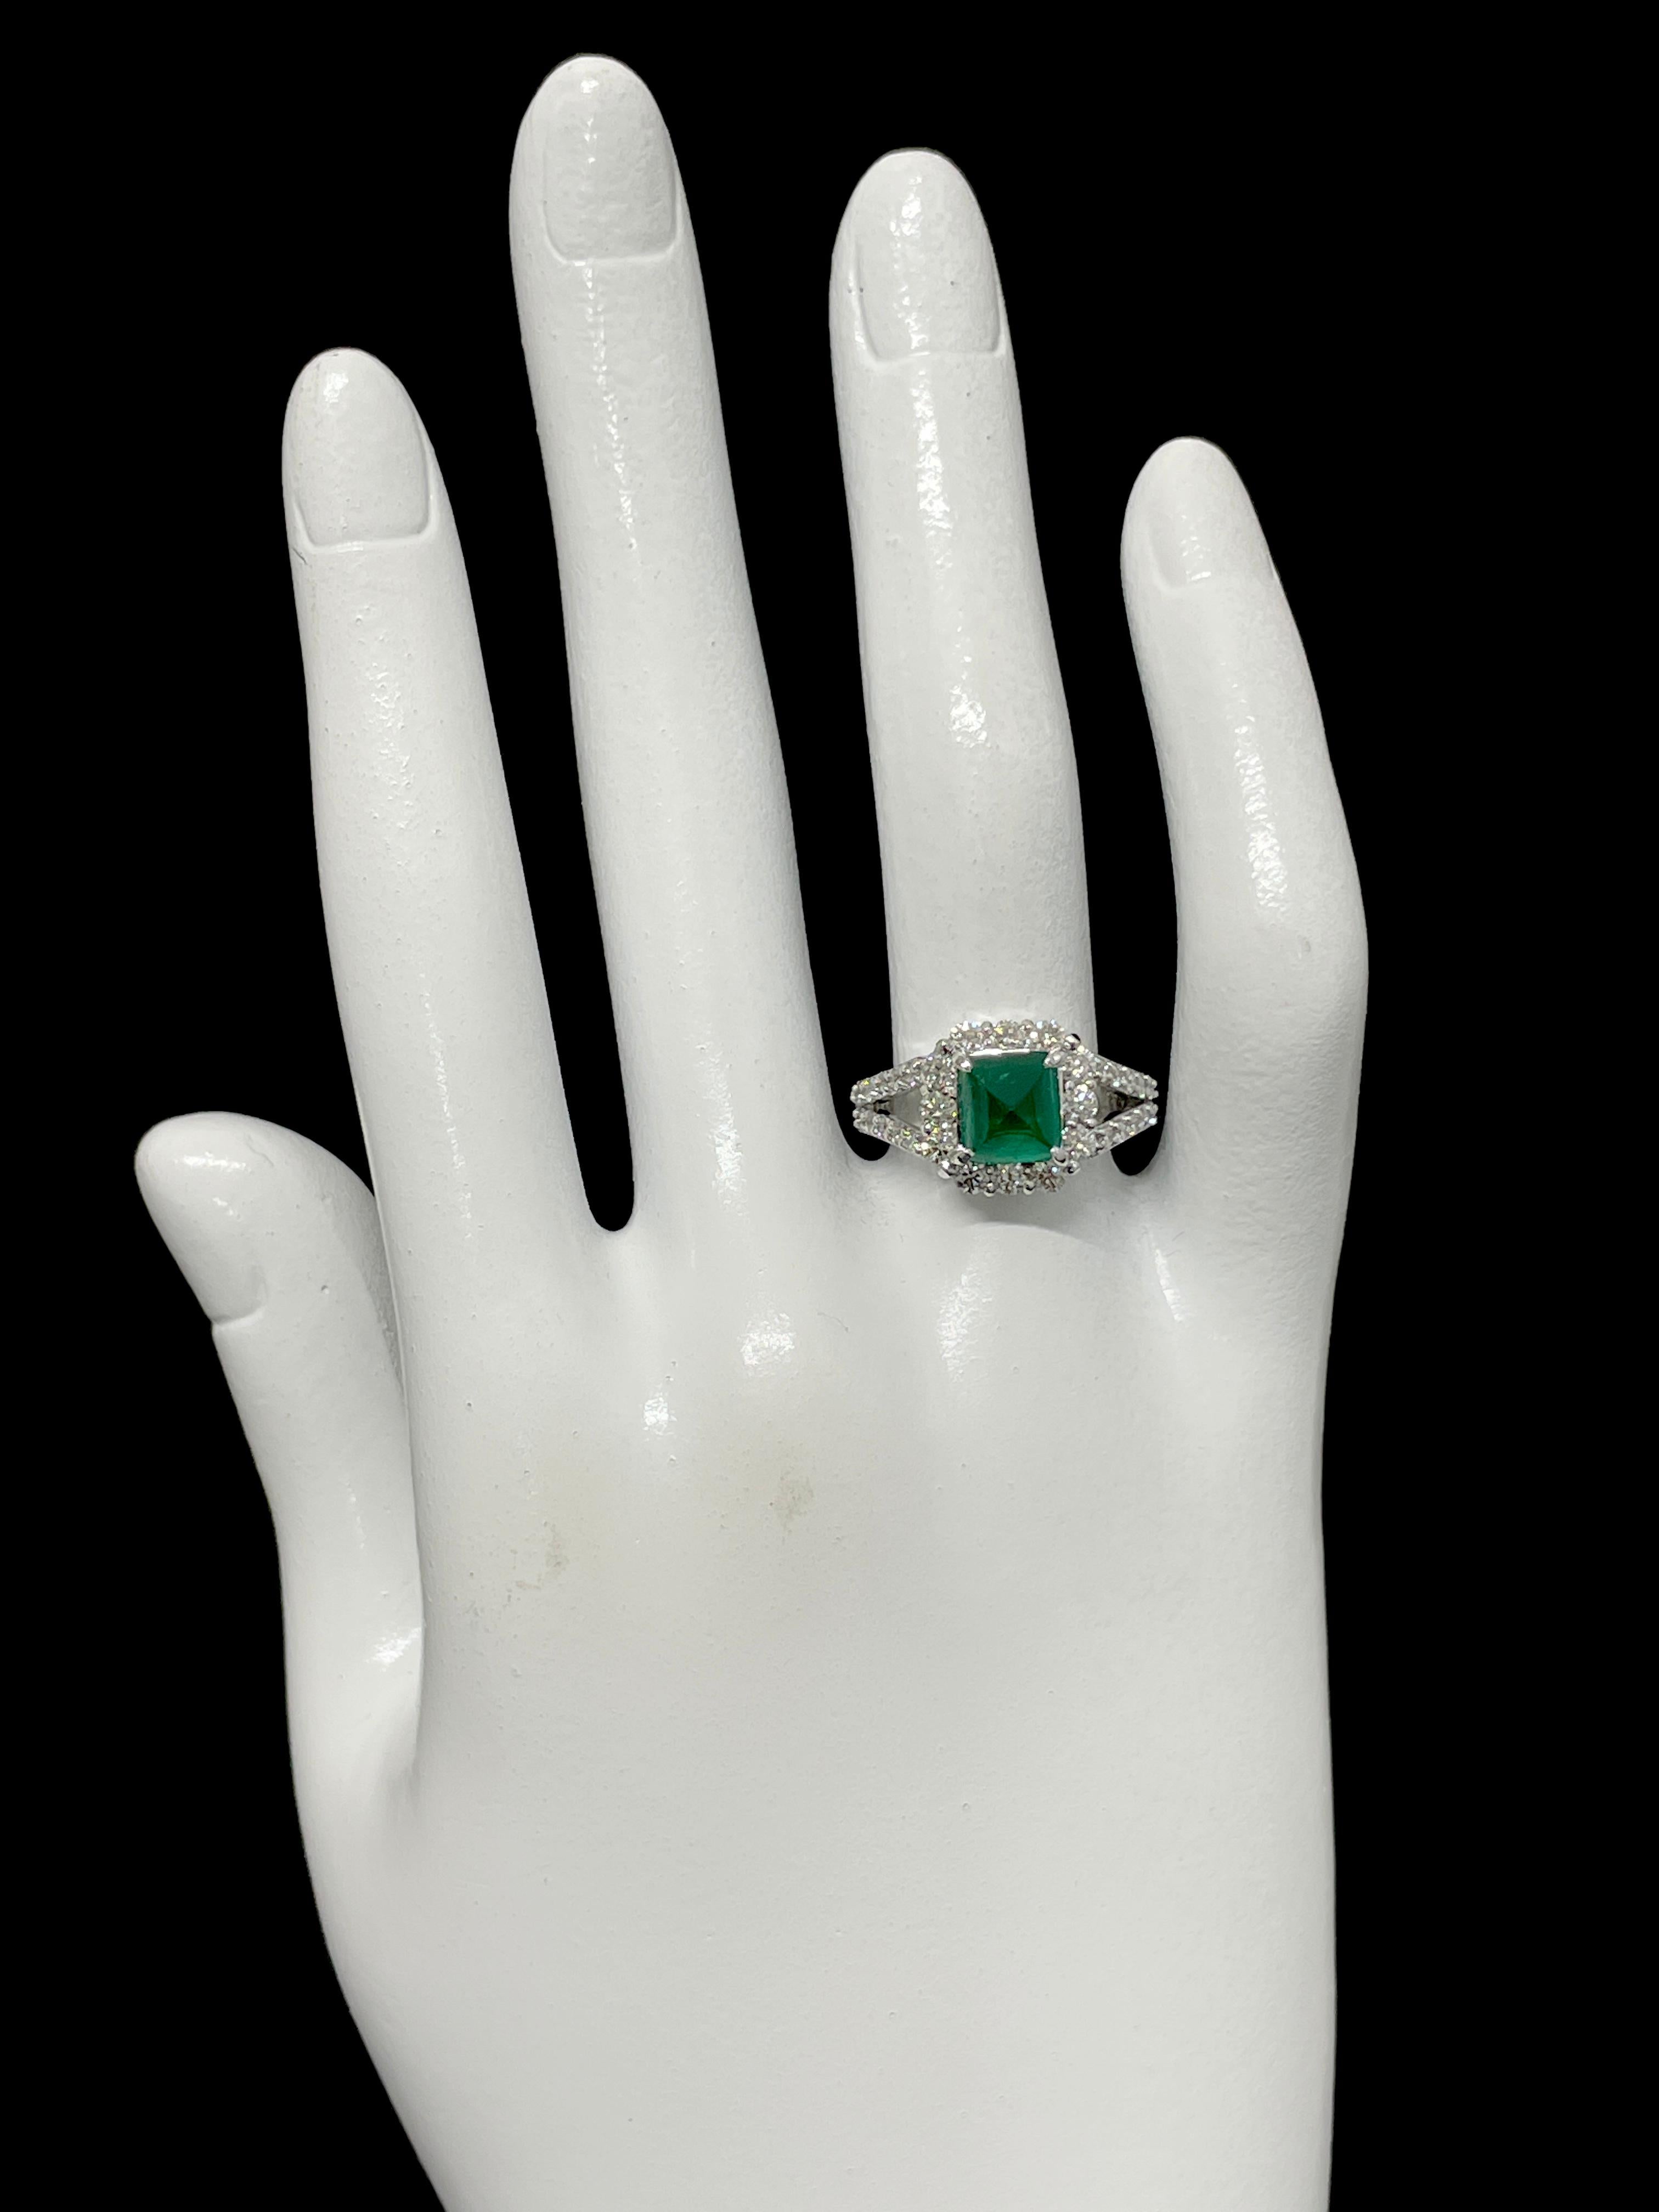 1.35 Carat Natural Emerald Sugarloaf Cabochon and Diamond Ring Set in Platinum For Sale 2